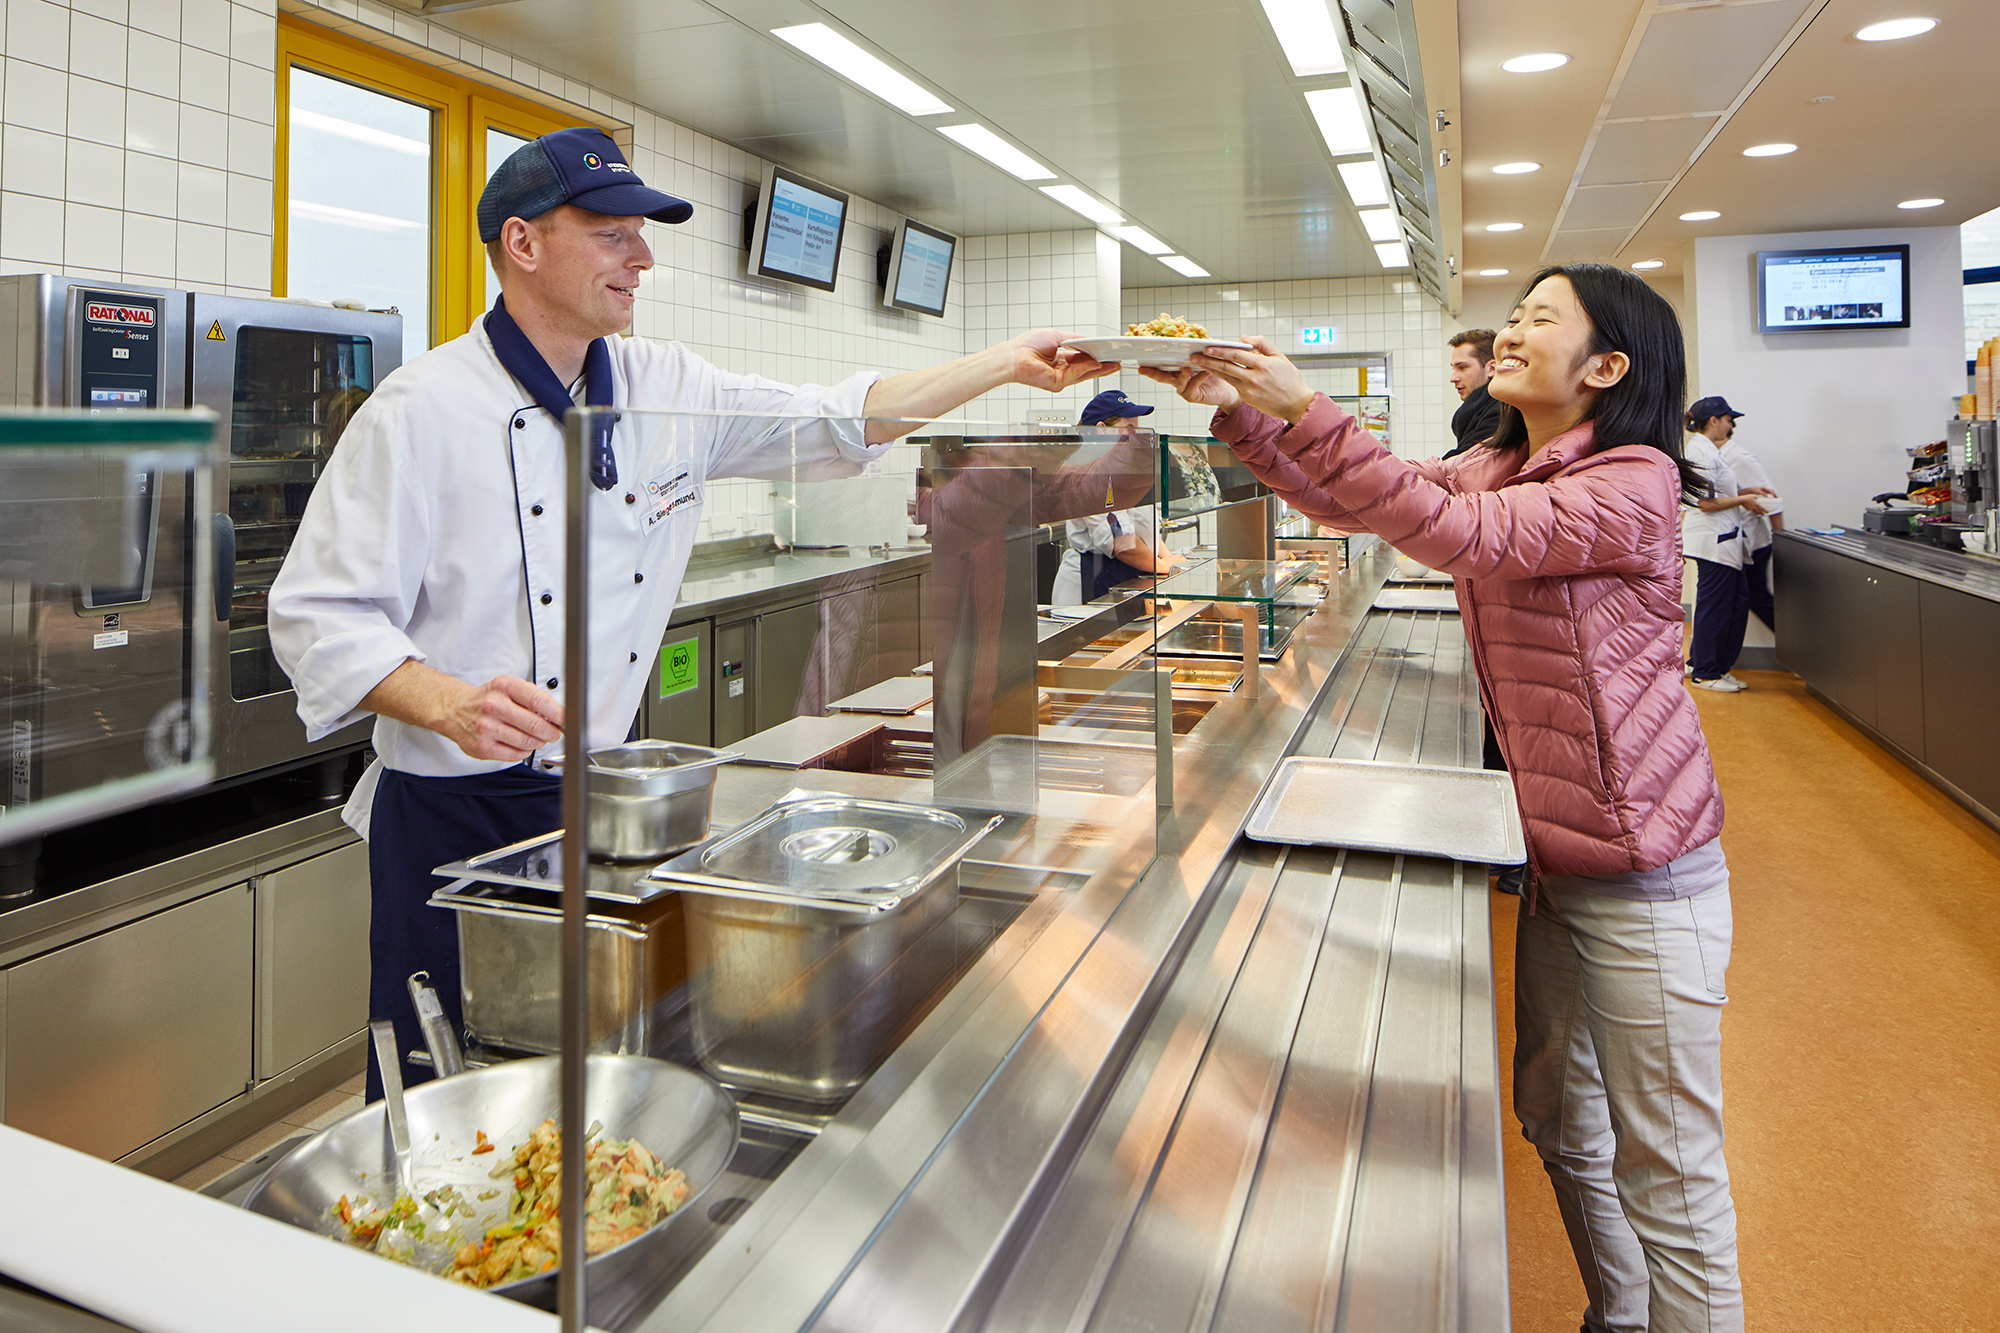 A staff member hands the food plate to the student at the counter 